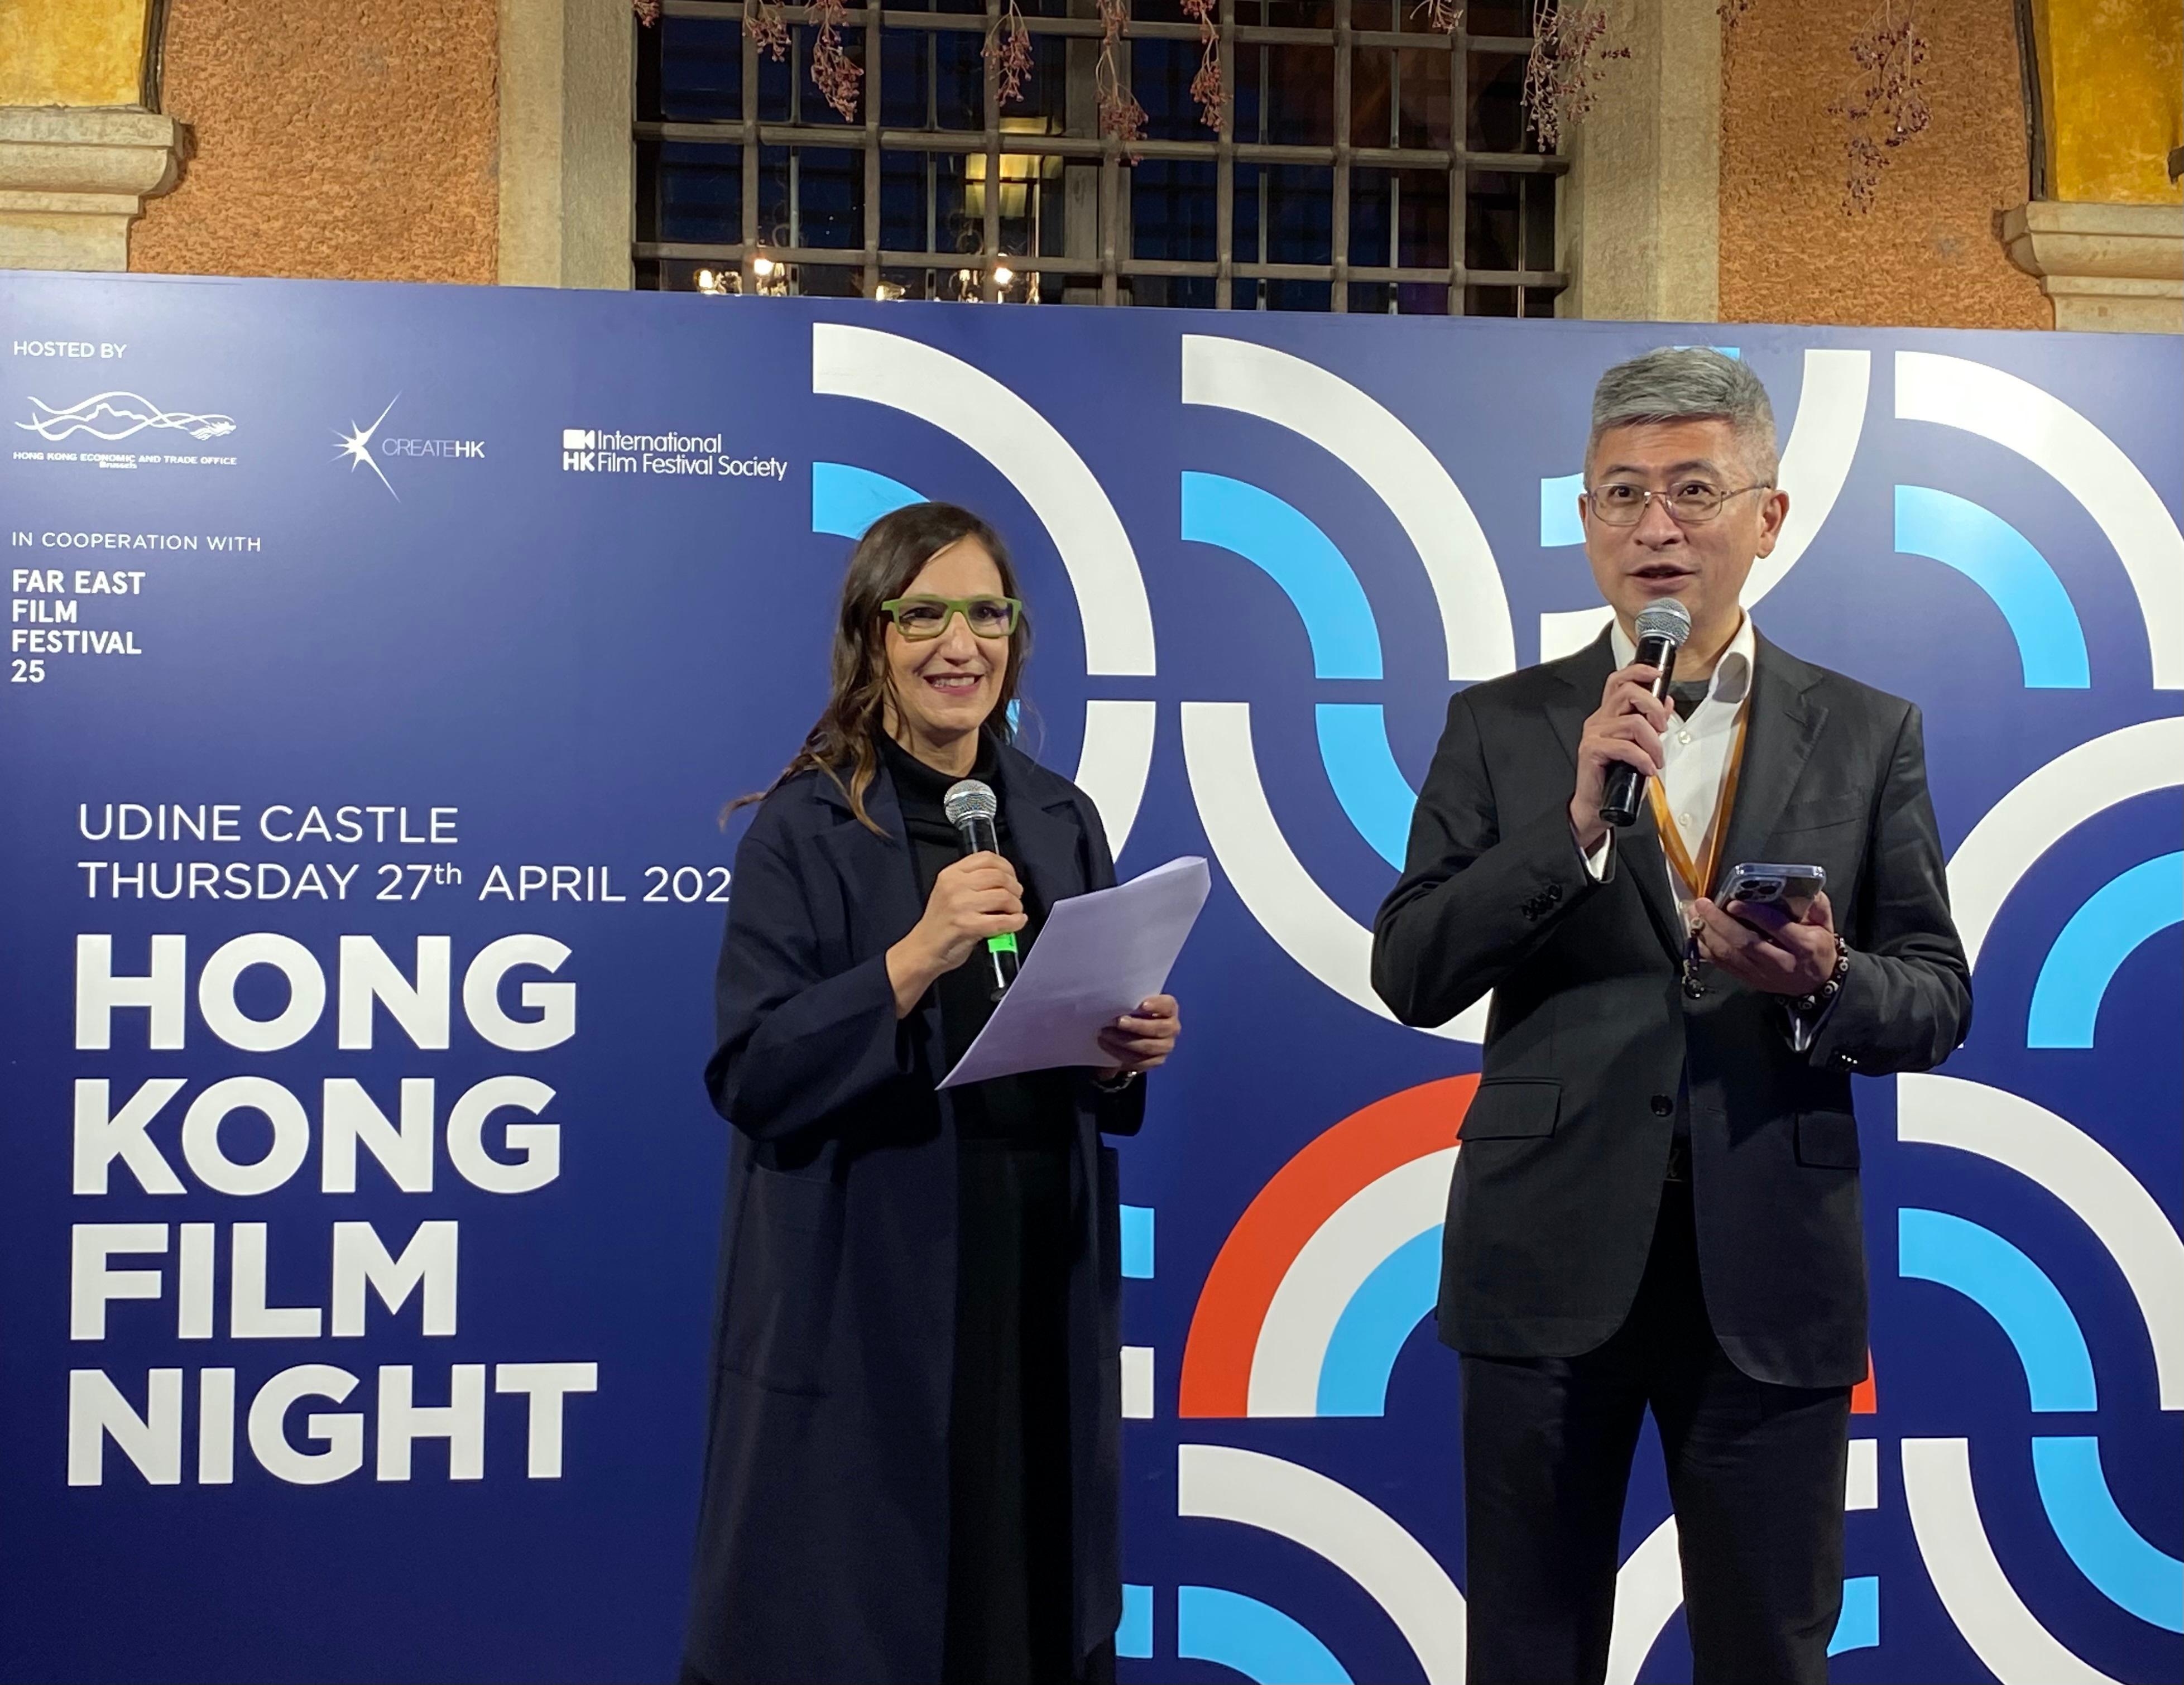 The Under Secretary for Culture, Sports and Tourism, Mr Raistlin Lau (right), addresses guests from the international cinema and cultural scene at the networking reception of the Hong Kong Film Night held in Udine, Italy, on April 27 (Udine time) during the 25th Far East Film Festival (FEFF). Next to him is the President of the FEFF, Ms Sabrina Baracetti (left).